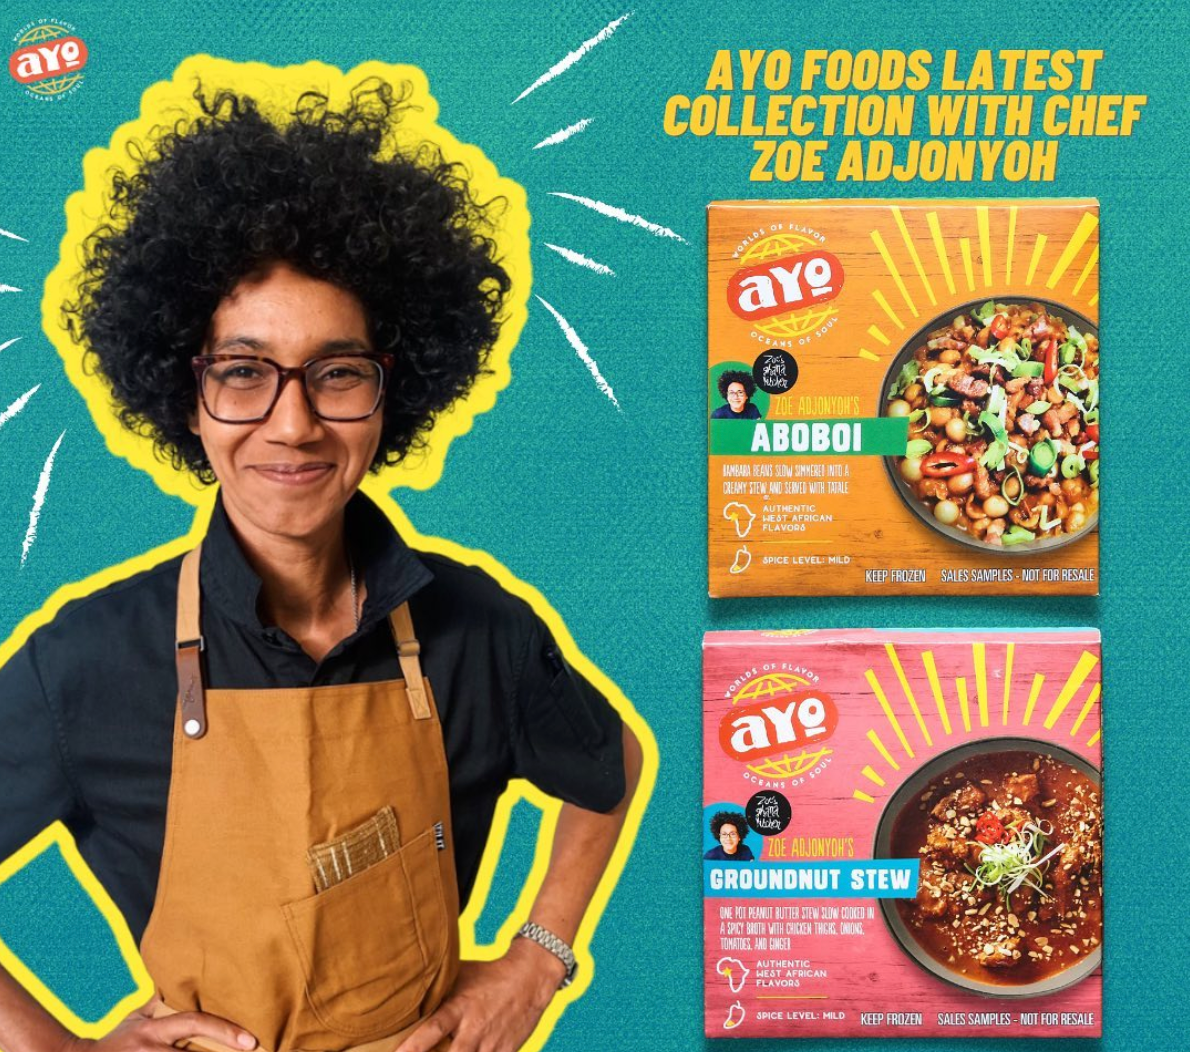 AYO Partners with Chef Zoe Adjonyoh in West African Frozen Entree Debut.